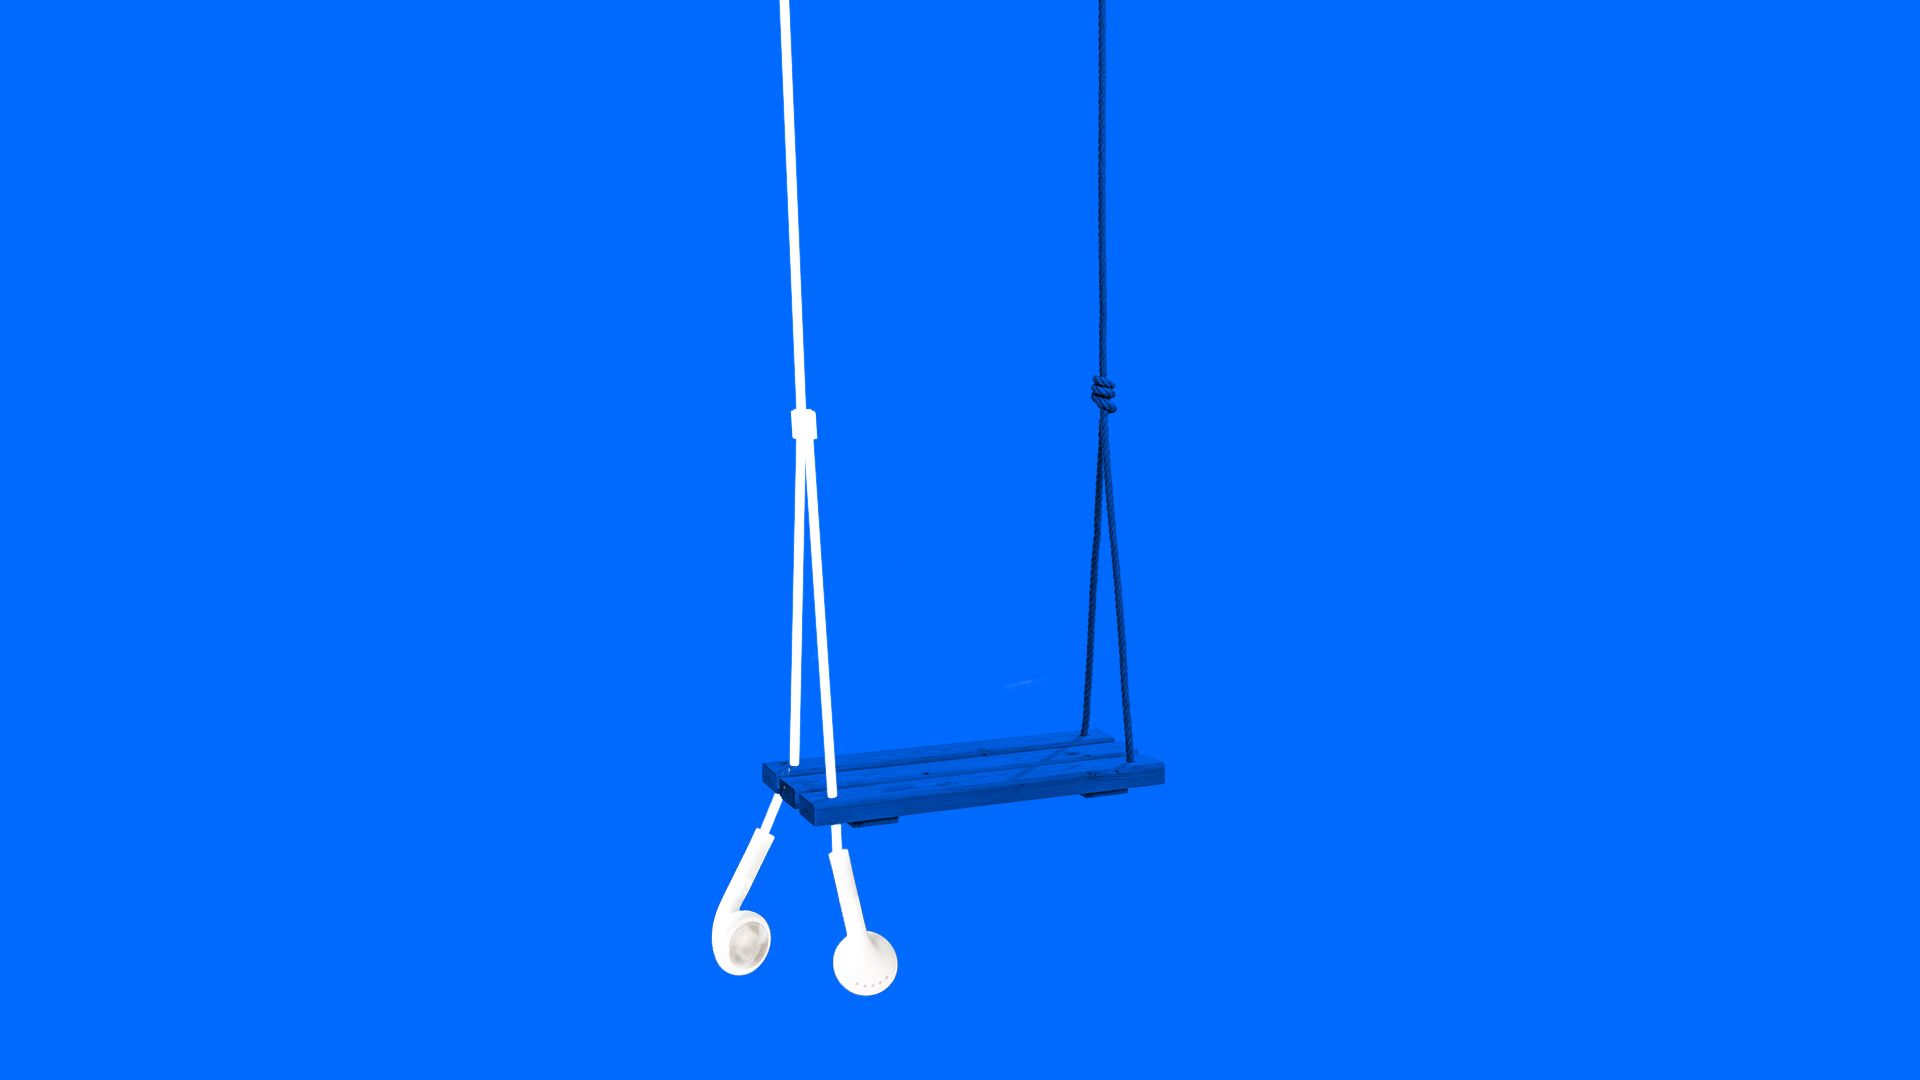 Illustration of a children's swing hanging from Apple earbuds